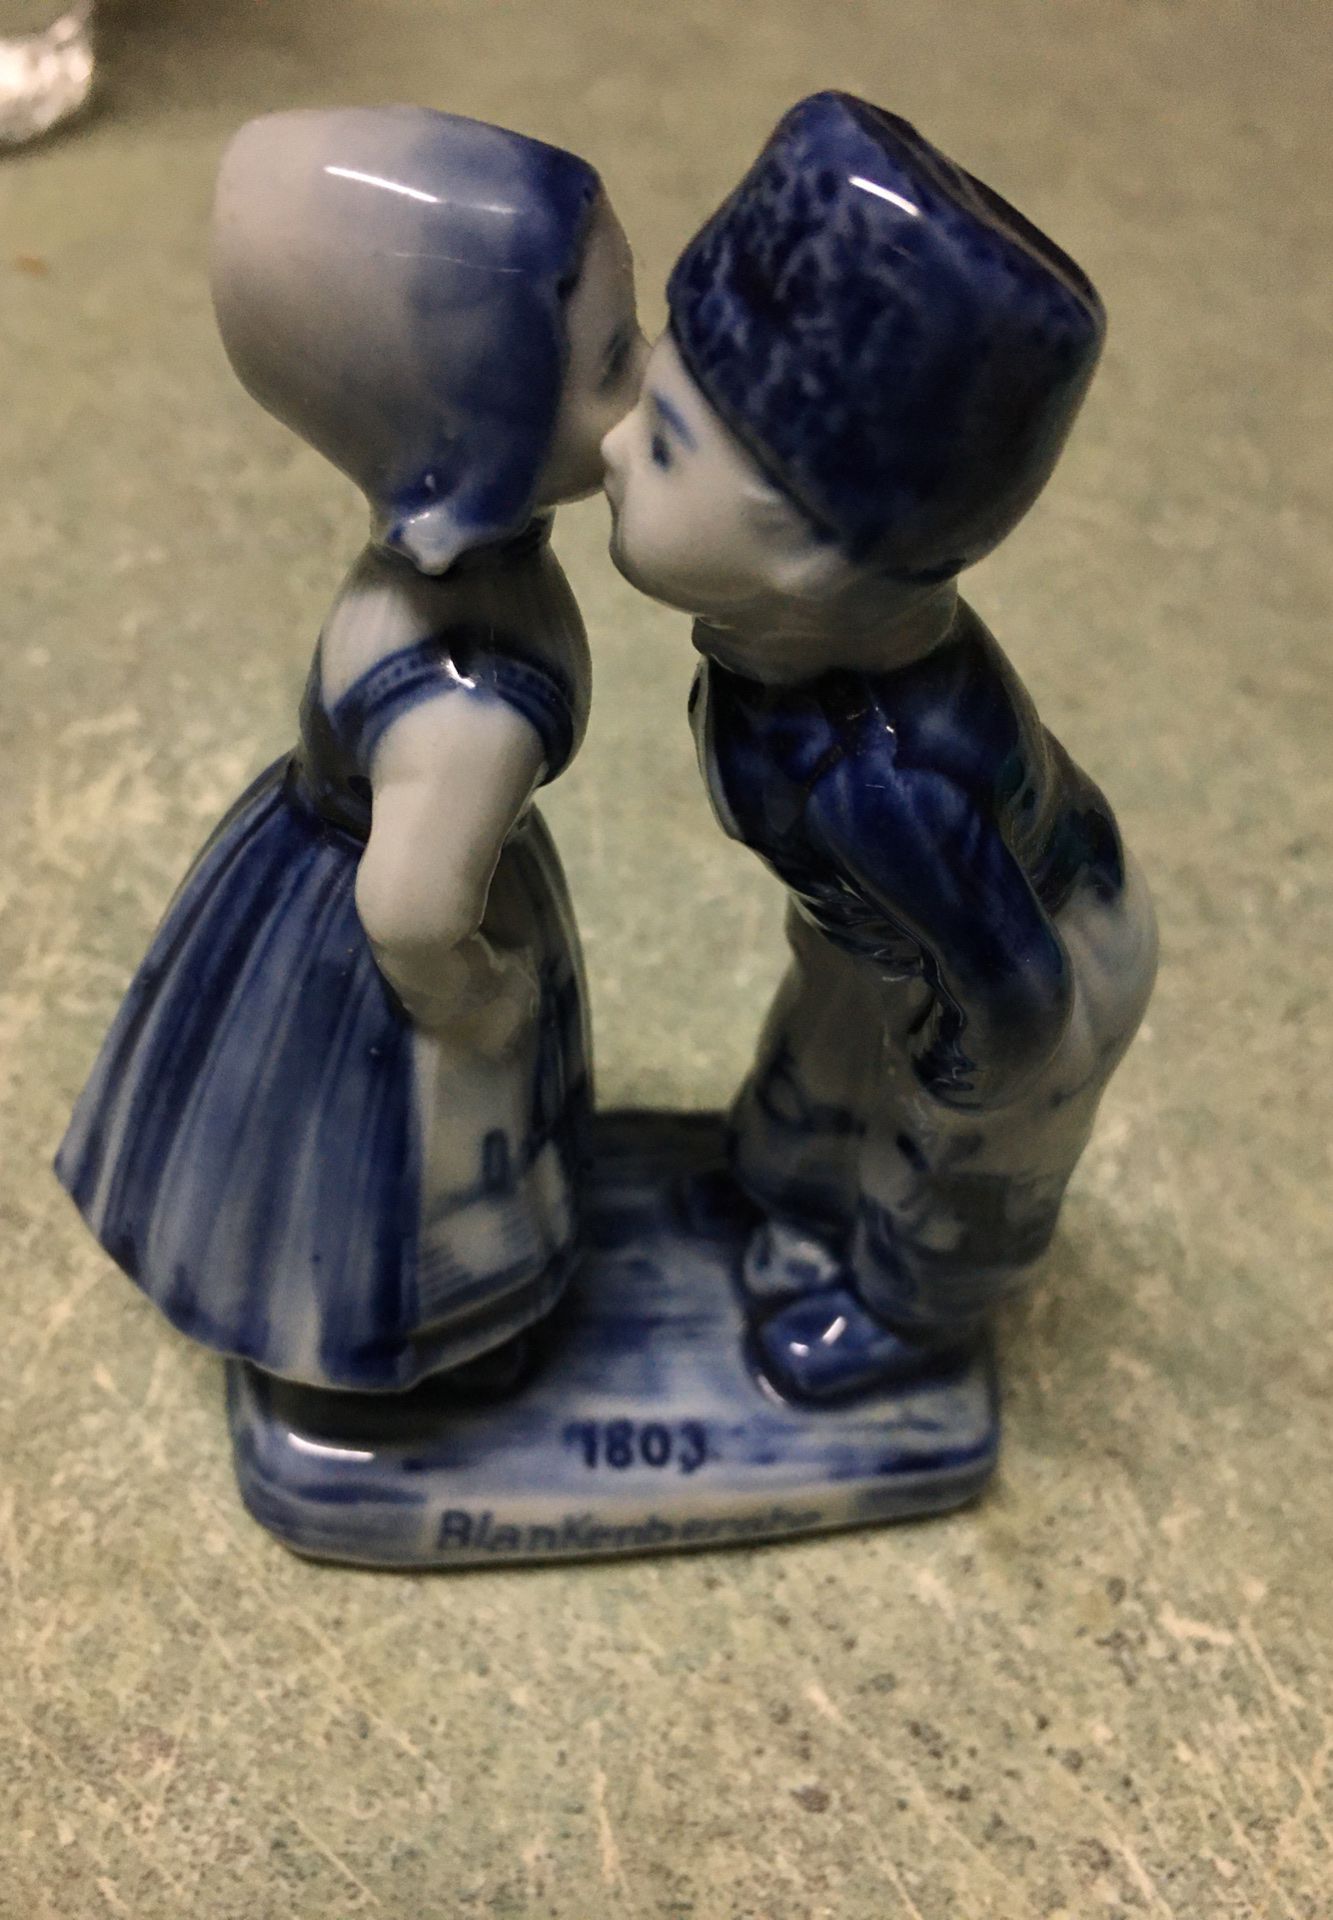 Delft style Porcelain figure of boy and girl kissing